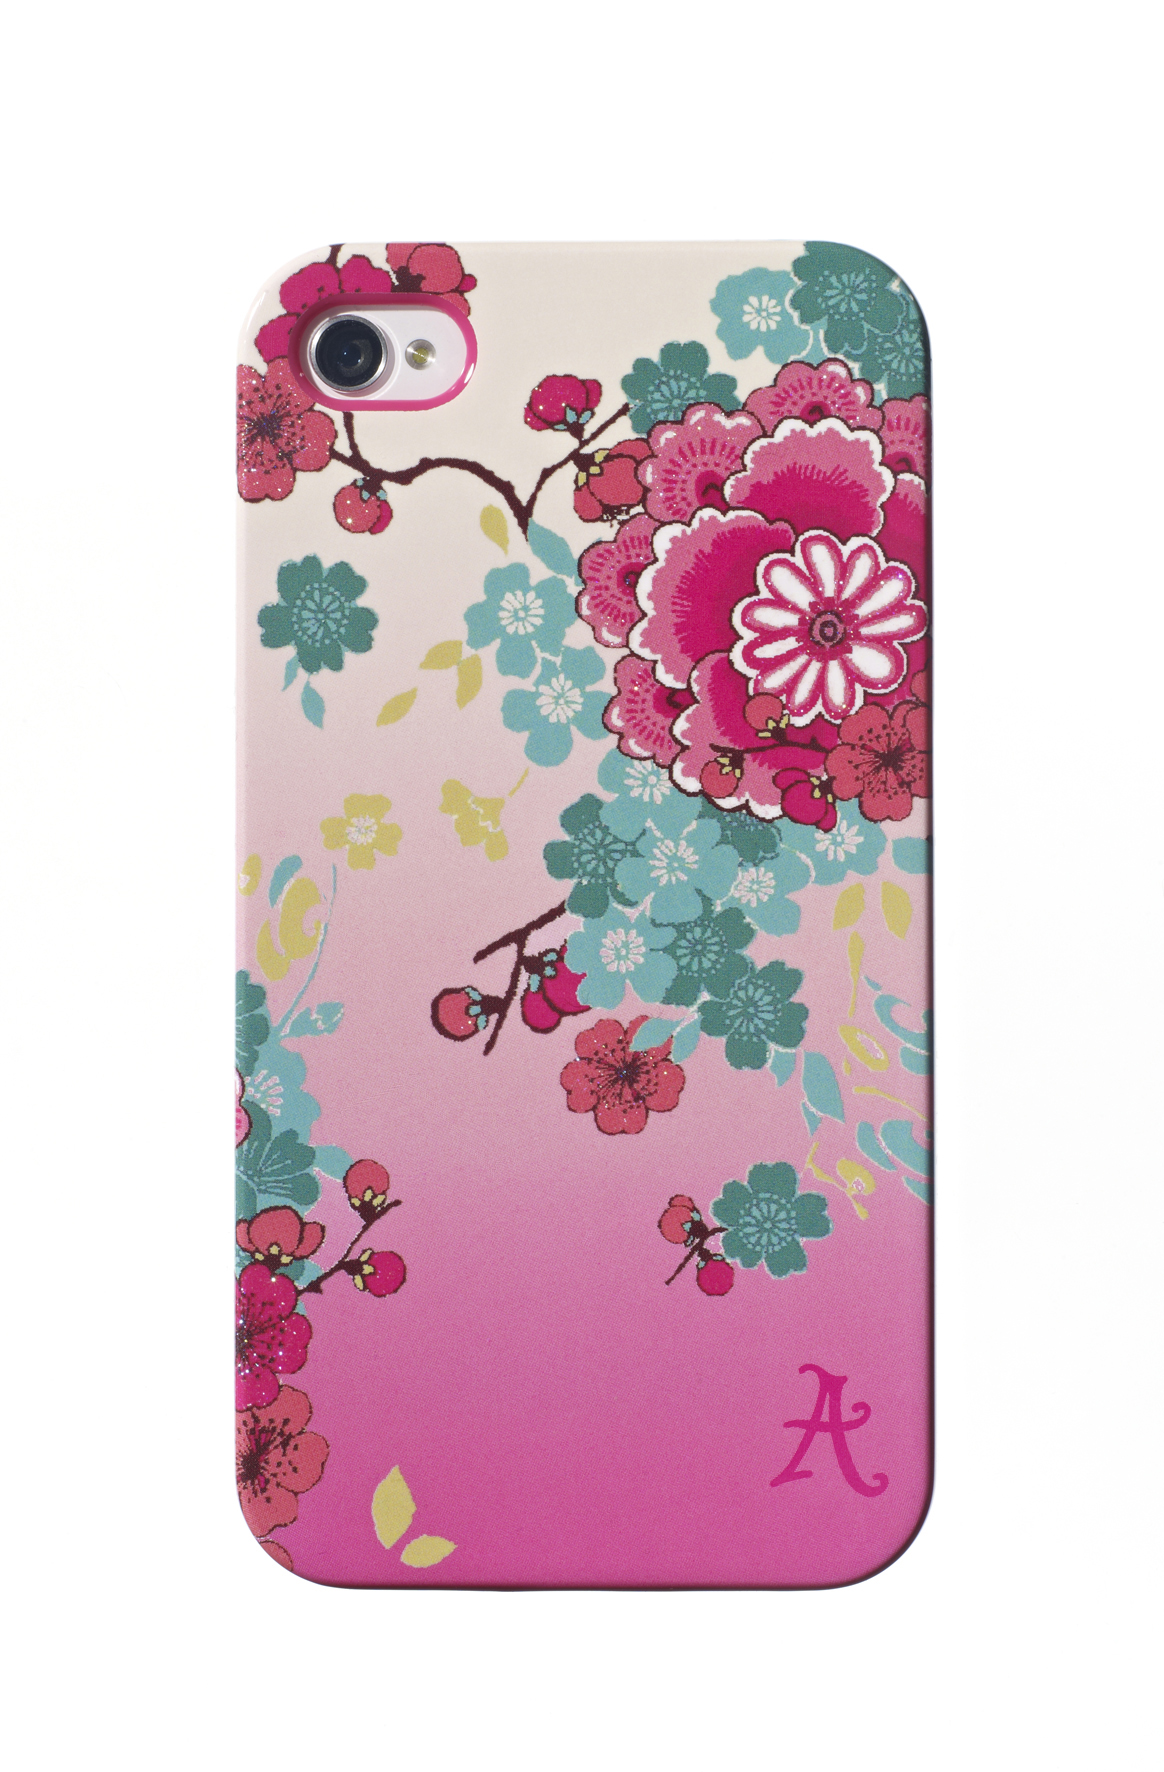 ACCESSORIZE iPhone Flower Apple, IPAC-C1-PFLW-I5, 5, iPhone 5s, Pink